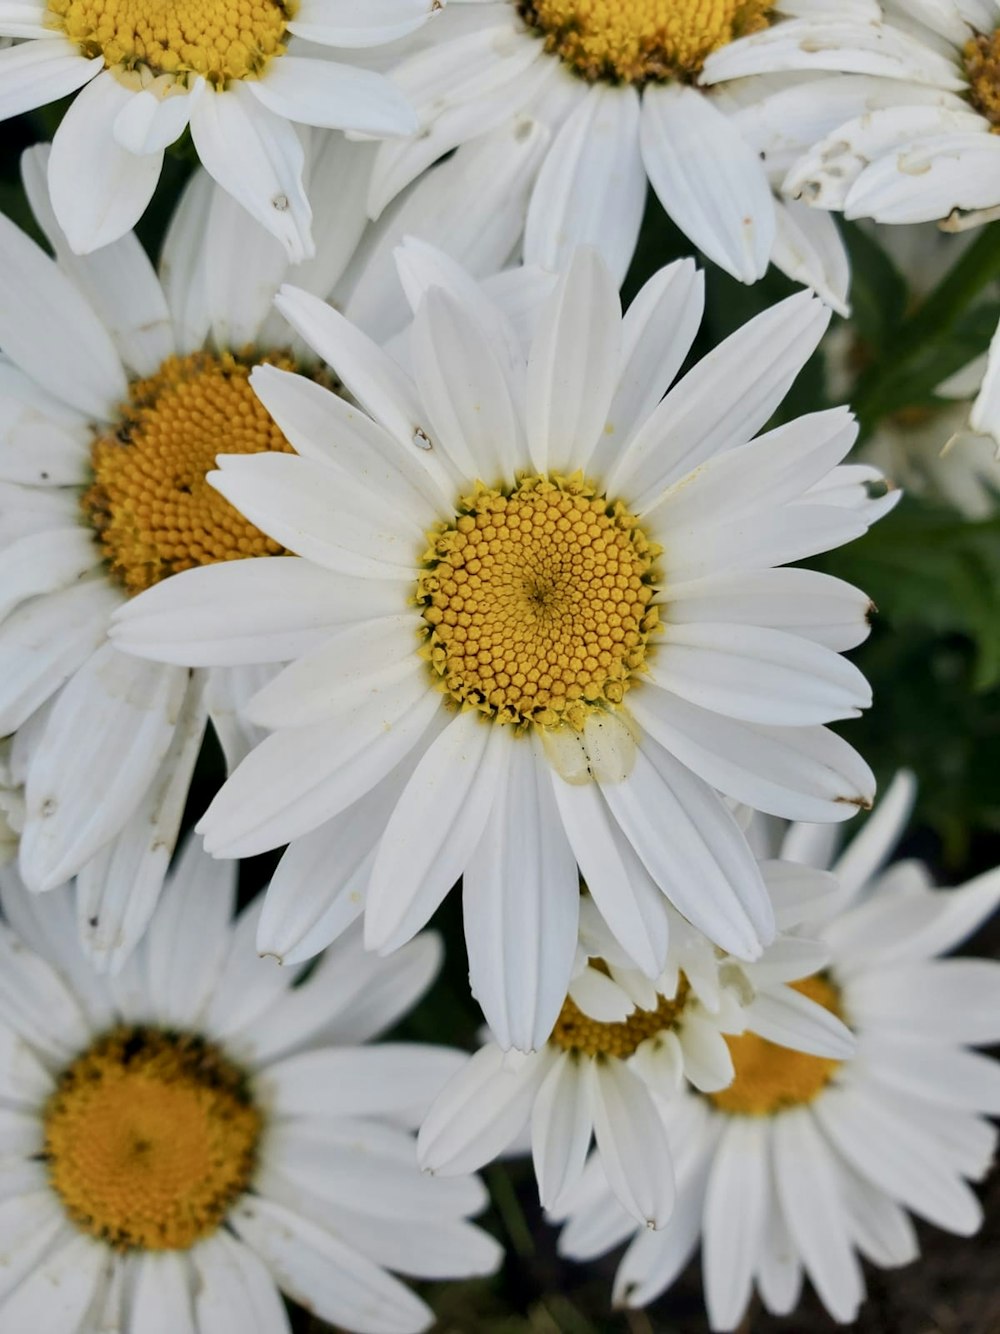 a bunch of white flowers with yellow centers